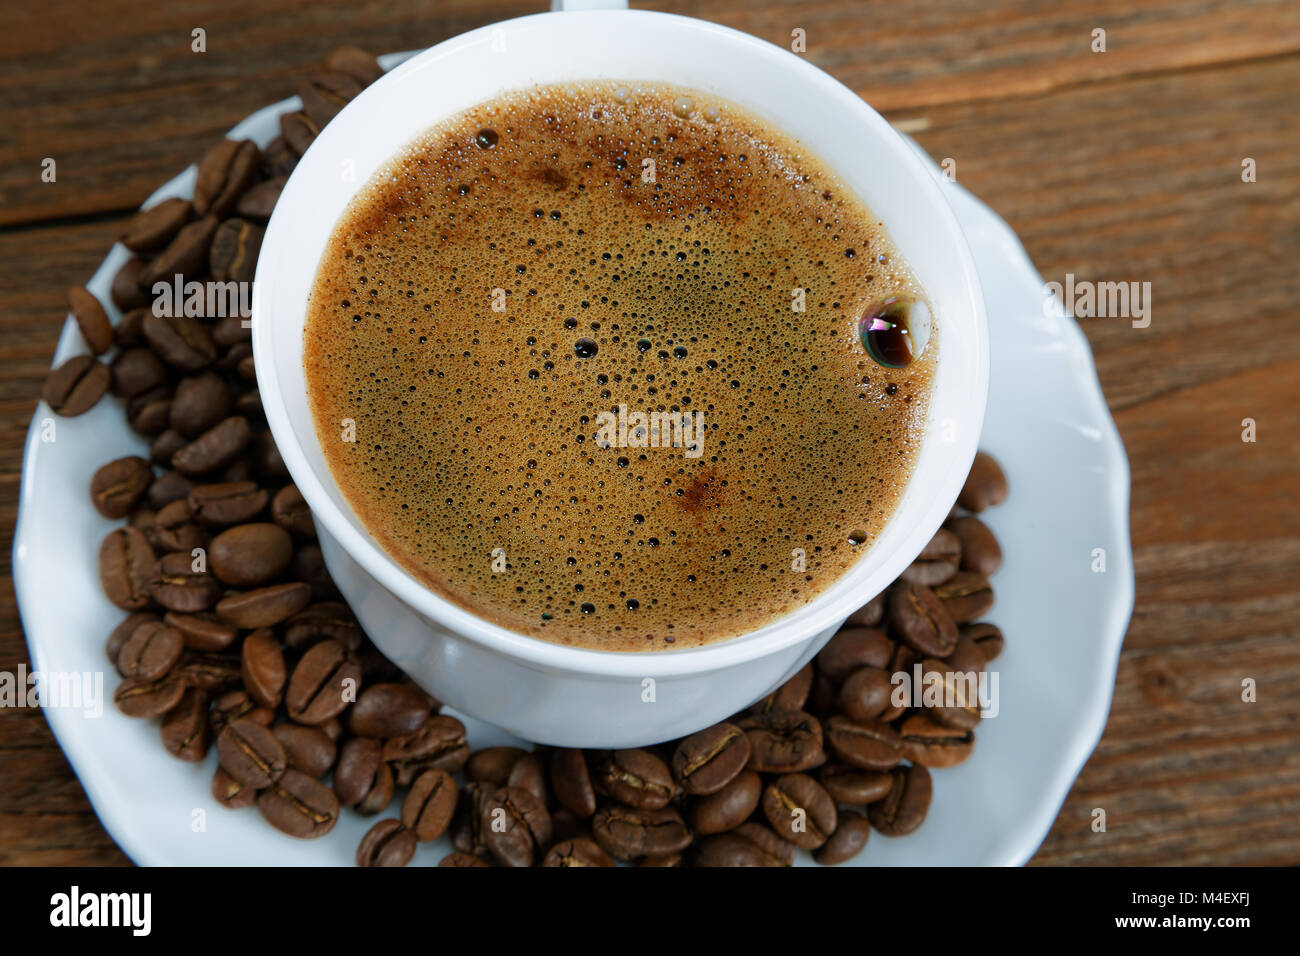 Cup with coffee on the table next to coffee beans Stock Photo